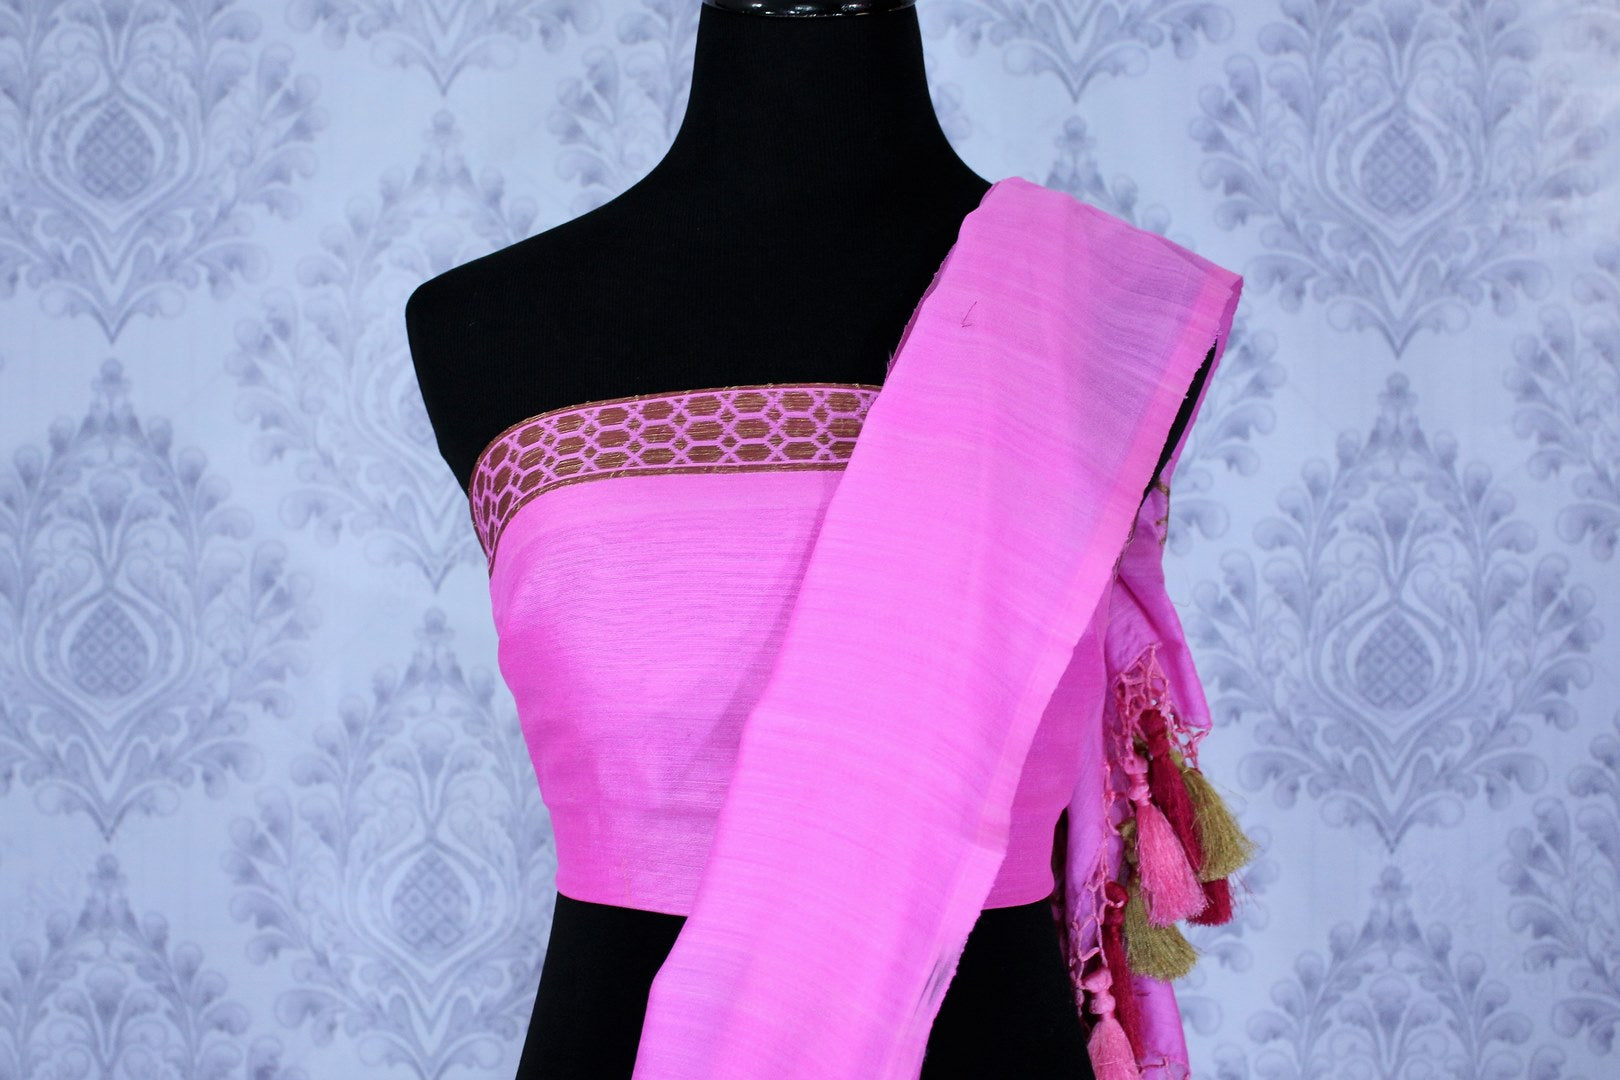 Buy light pink muga Benarasi saree online in USA. The striking saree is a great choice to keep it simple and ethnic at special occasions. Select from an exquisite collection of traditional Indian Banarasi sarees, Banarasi silk saris at Pure Elegance clothing store or shop online for weddings, parties, and festivals.-blouse pallu